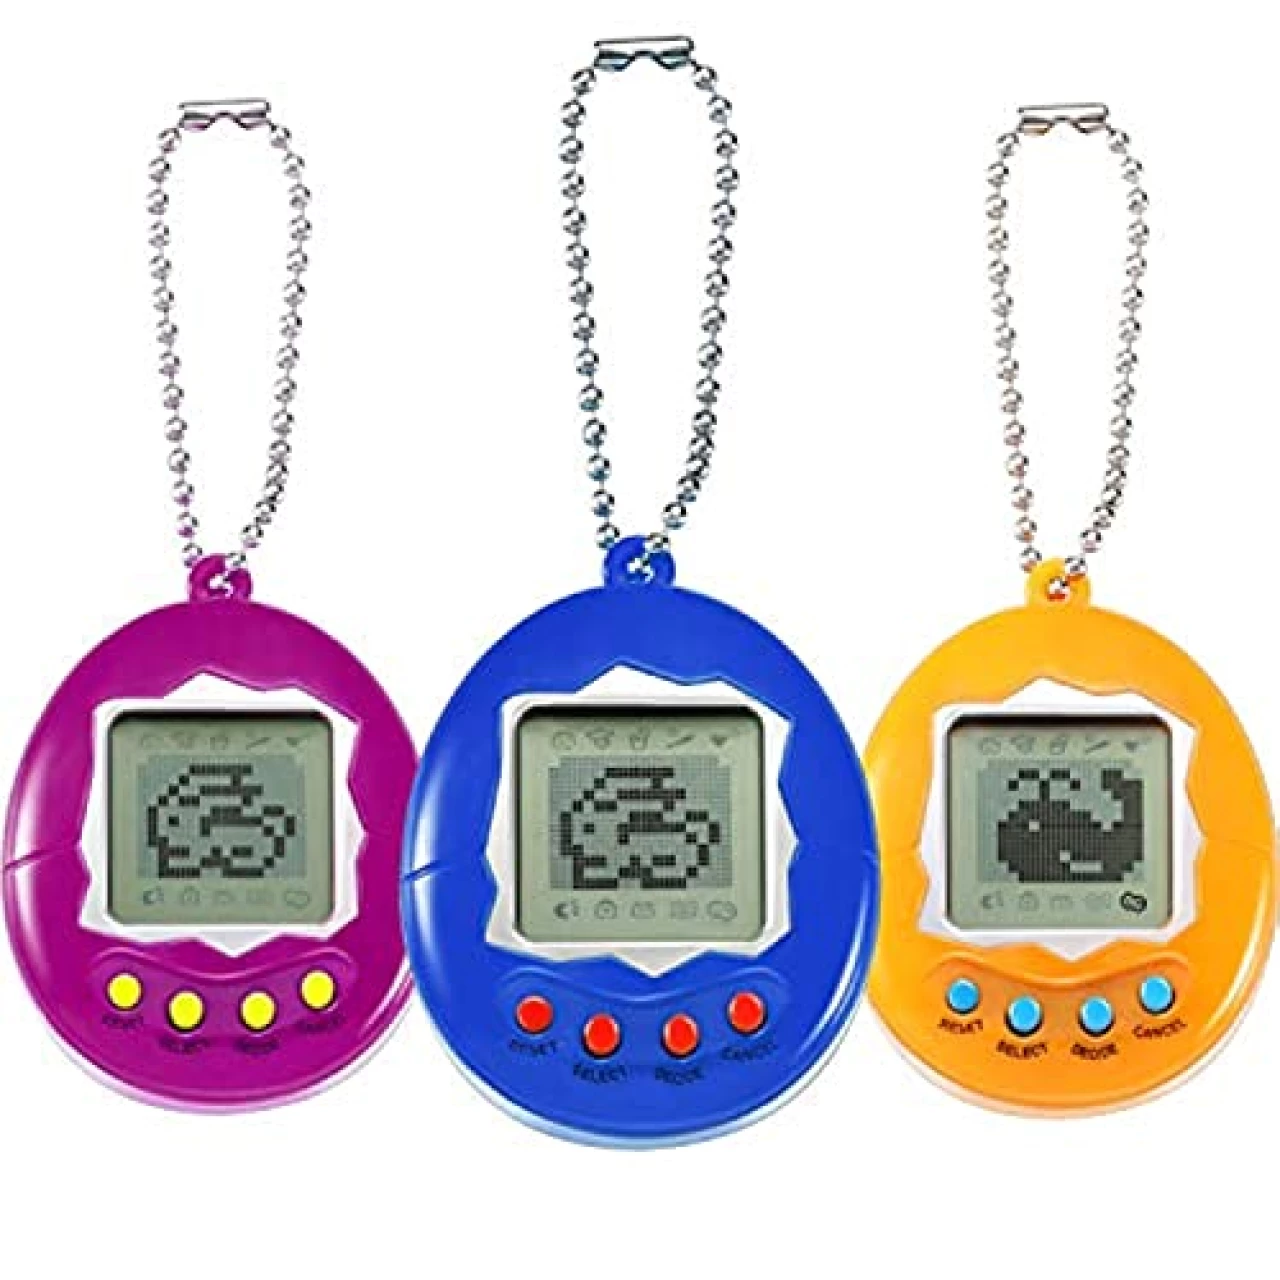 3 Pieces Virtual Electronic Digital Pets Keychain Game Keyring Electronic Toys (3 Pieces, Rose Red, Yellow, Blue)